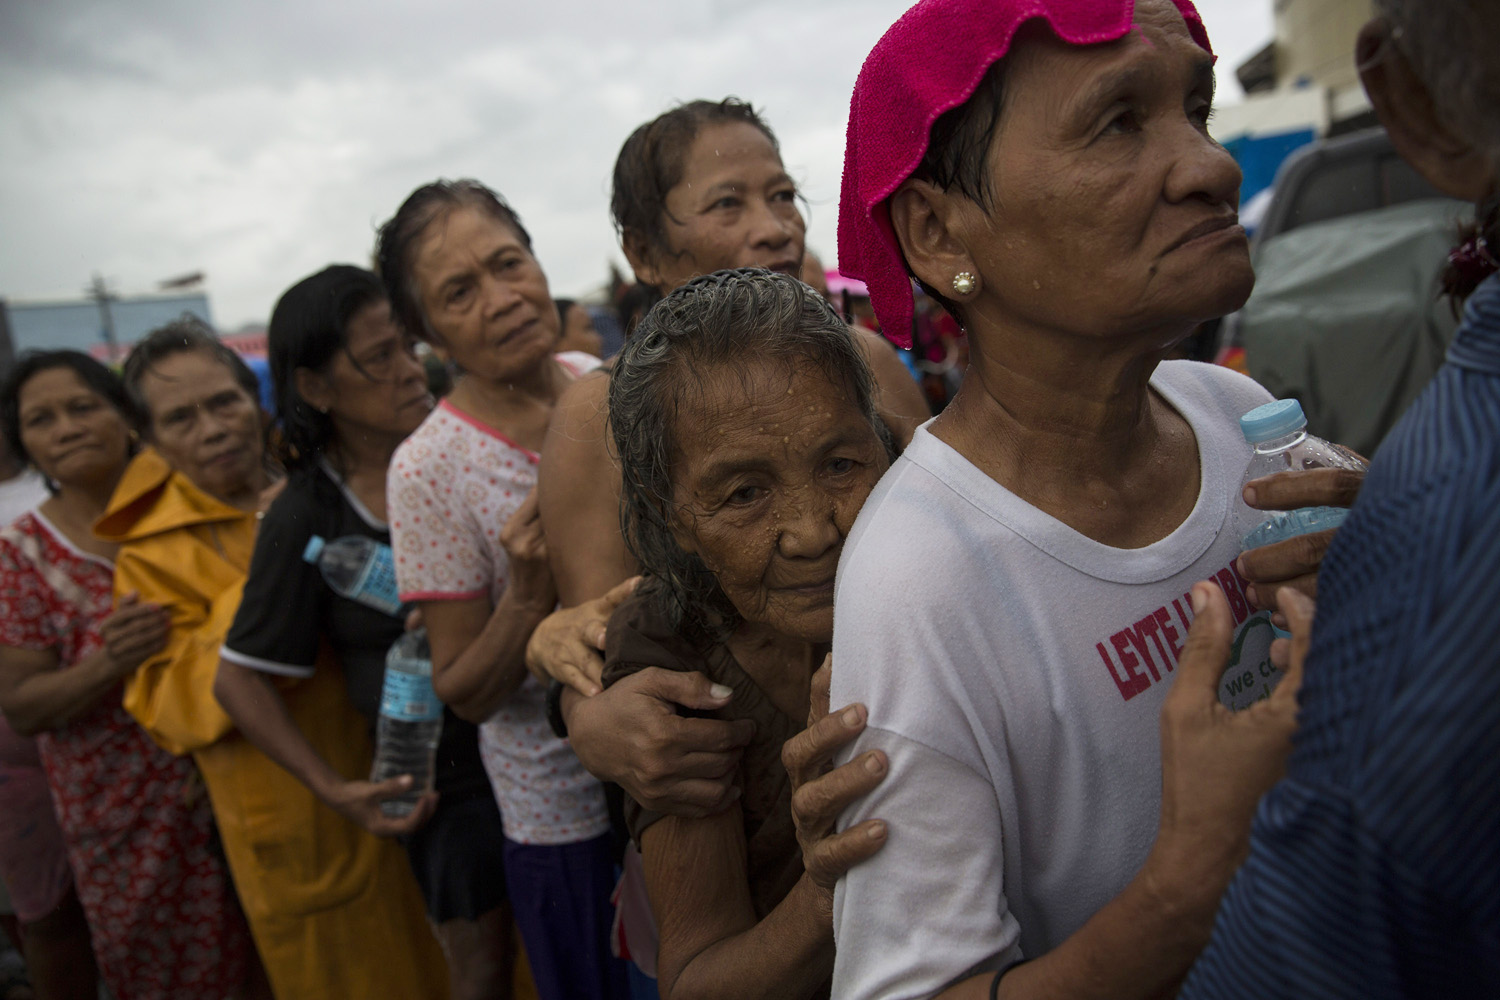 Displaced people effected by Haiyan Typhoon queue in the rain for the first aid delivery at a displacement camp in Tacloban, The Philippines on November 14, 2013.